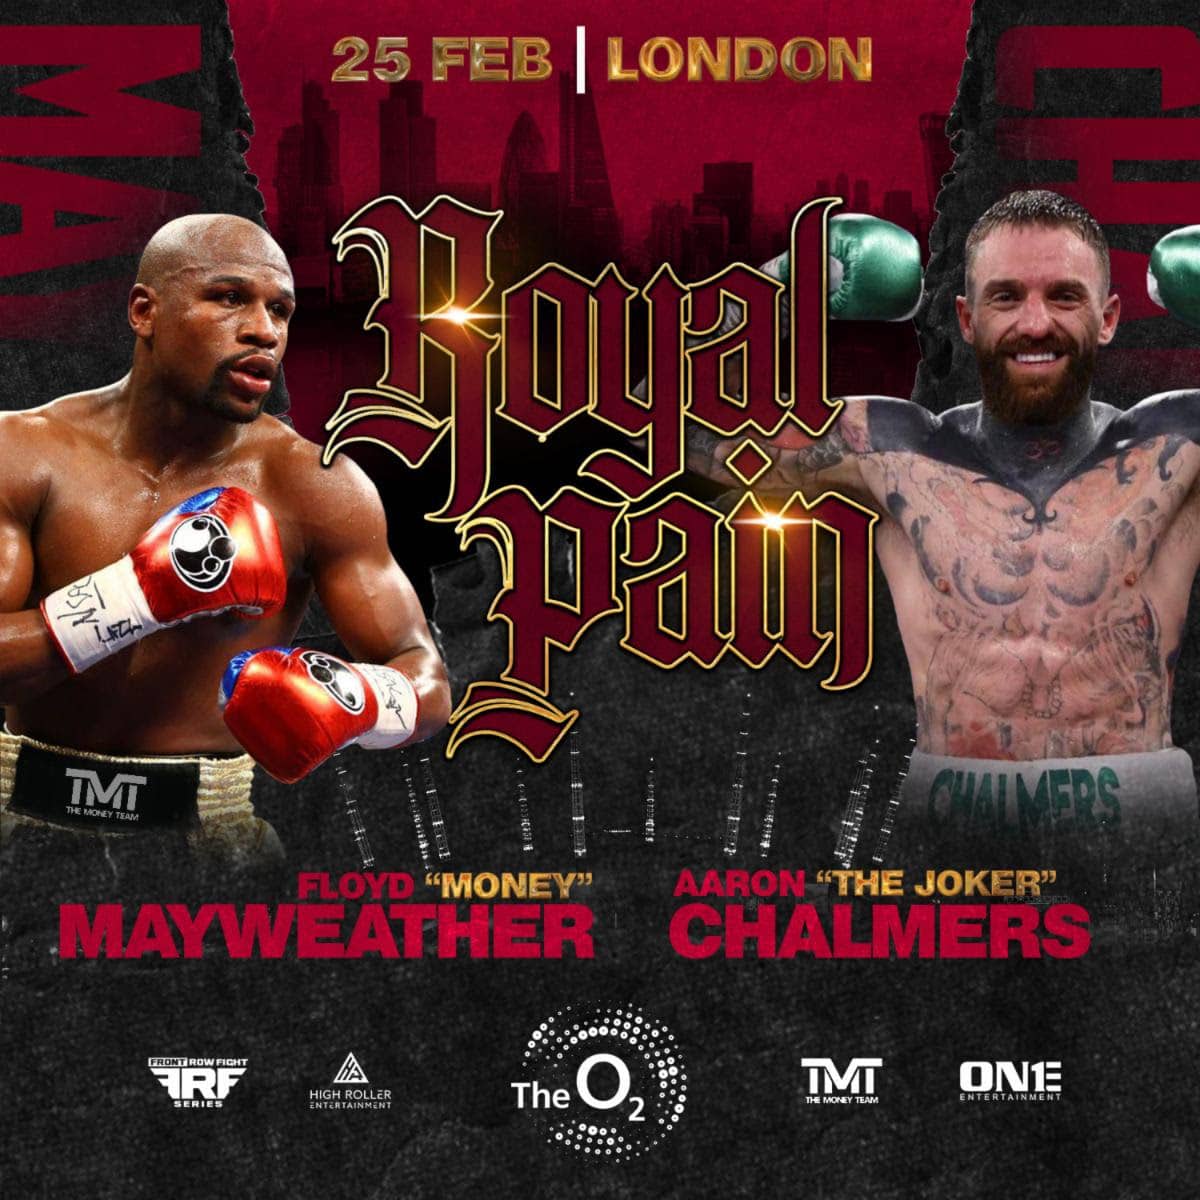 Floyd Mayweather vs Aaron Chalmers on Feb. 25 at the O2 in London